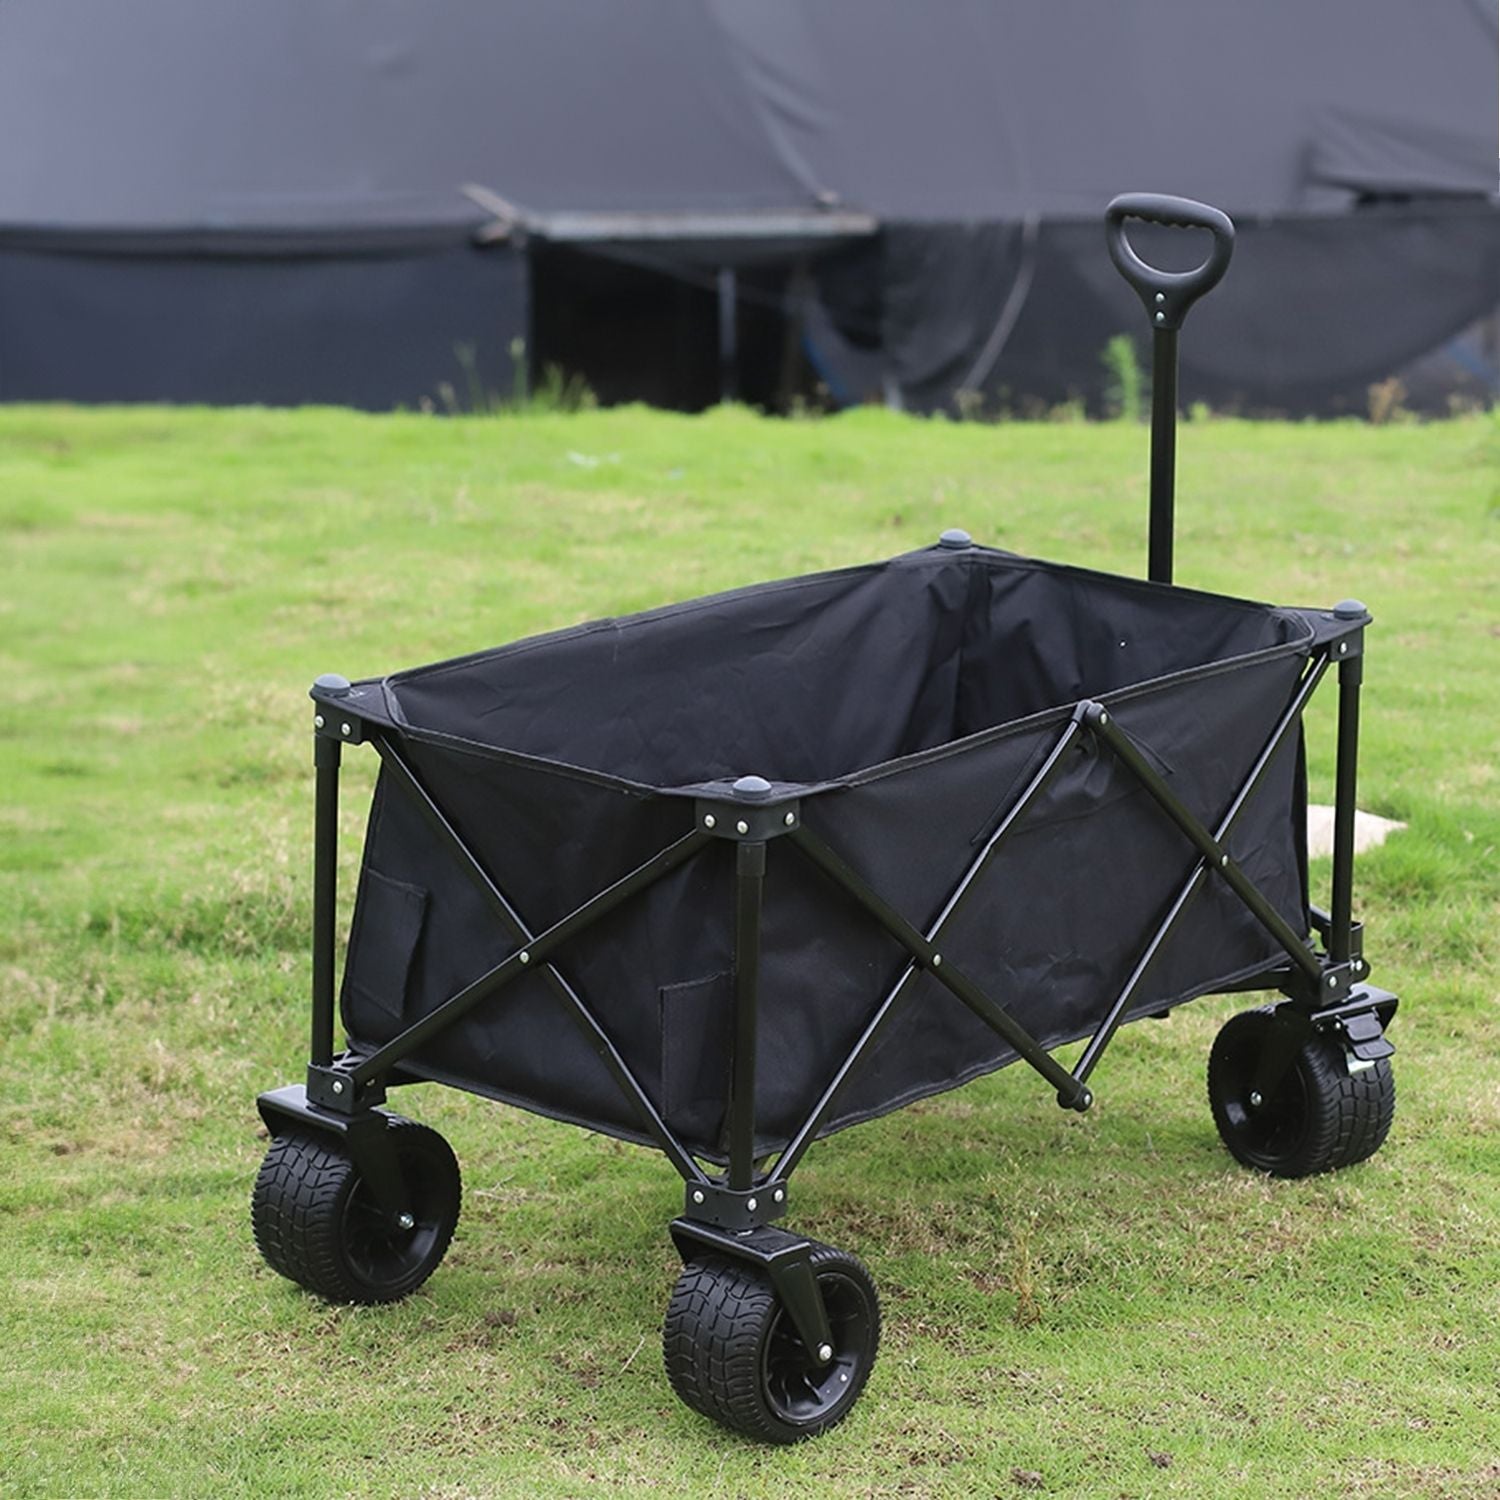 KILIROO Folding Wagon Trolley Cart with Wide Wheels and Rear Tail Gate (Black)